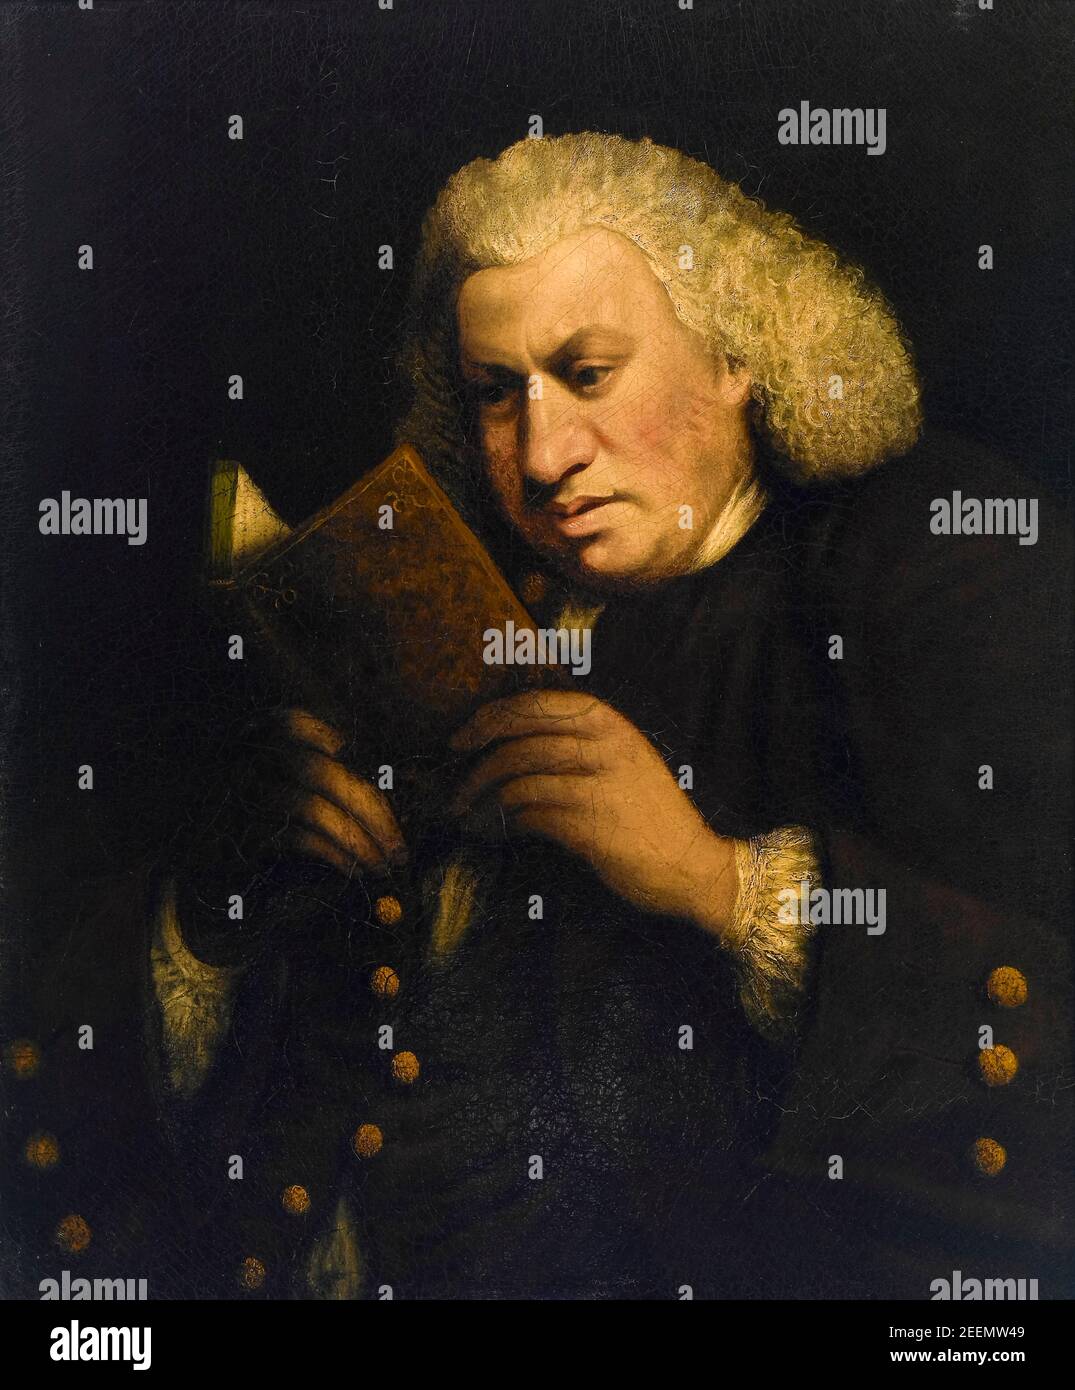 Dr Samuel Johnson (1709-1784), English Writer, published 'A Dictionary of the English Language' in 1755, portrait painting by Frances Reynolds, 1783 Stock Photo